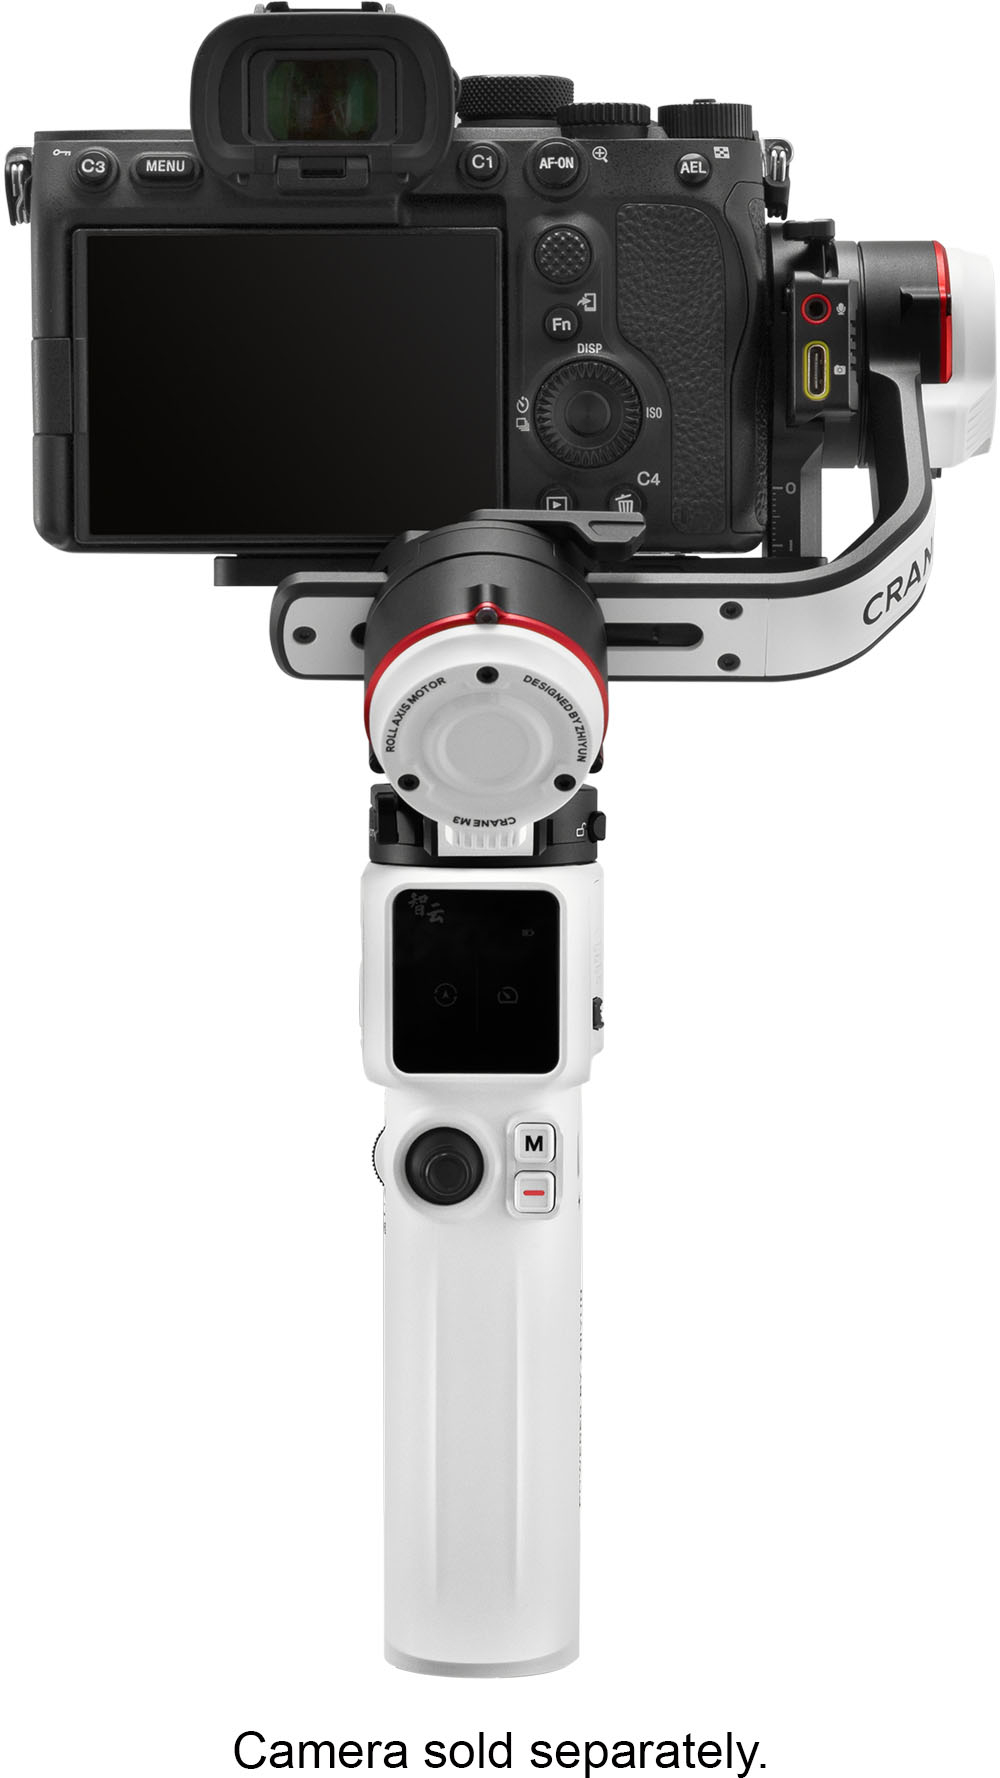 Zhiyun Crane M3 3-Axis Gimbal Stabilizer for Smartphones, Action